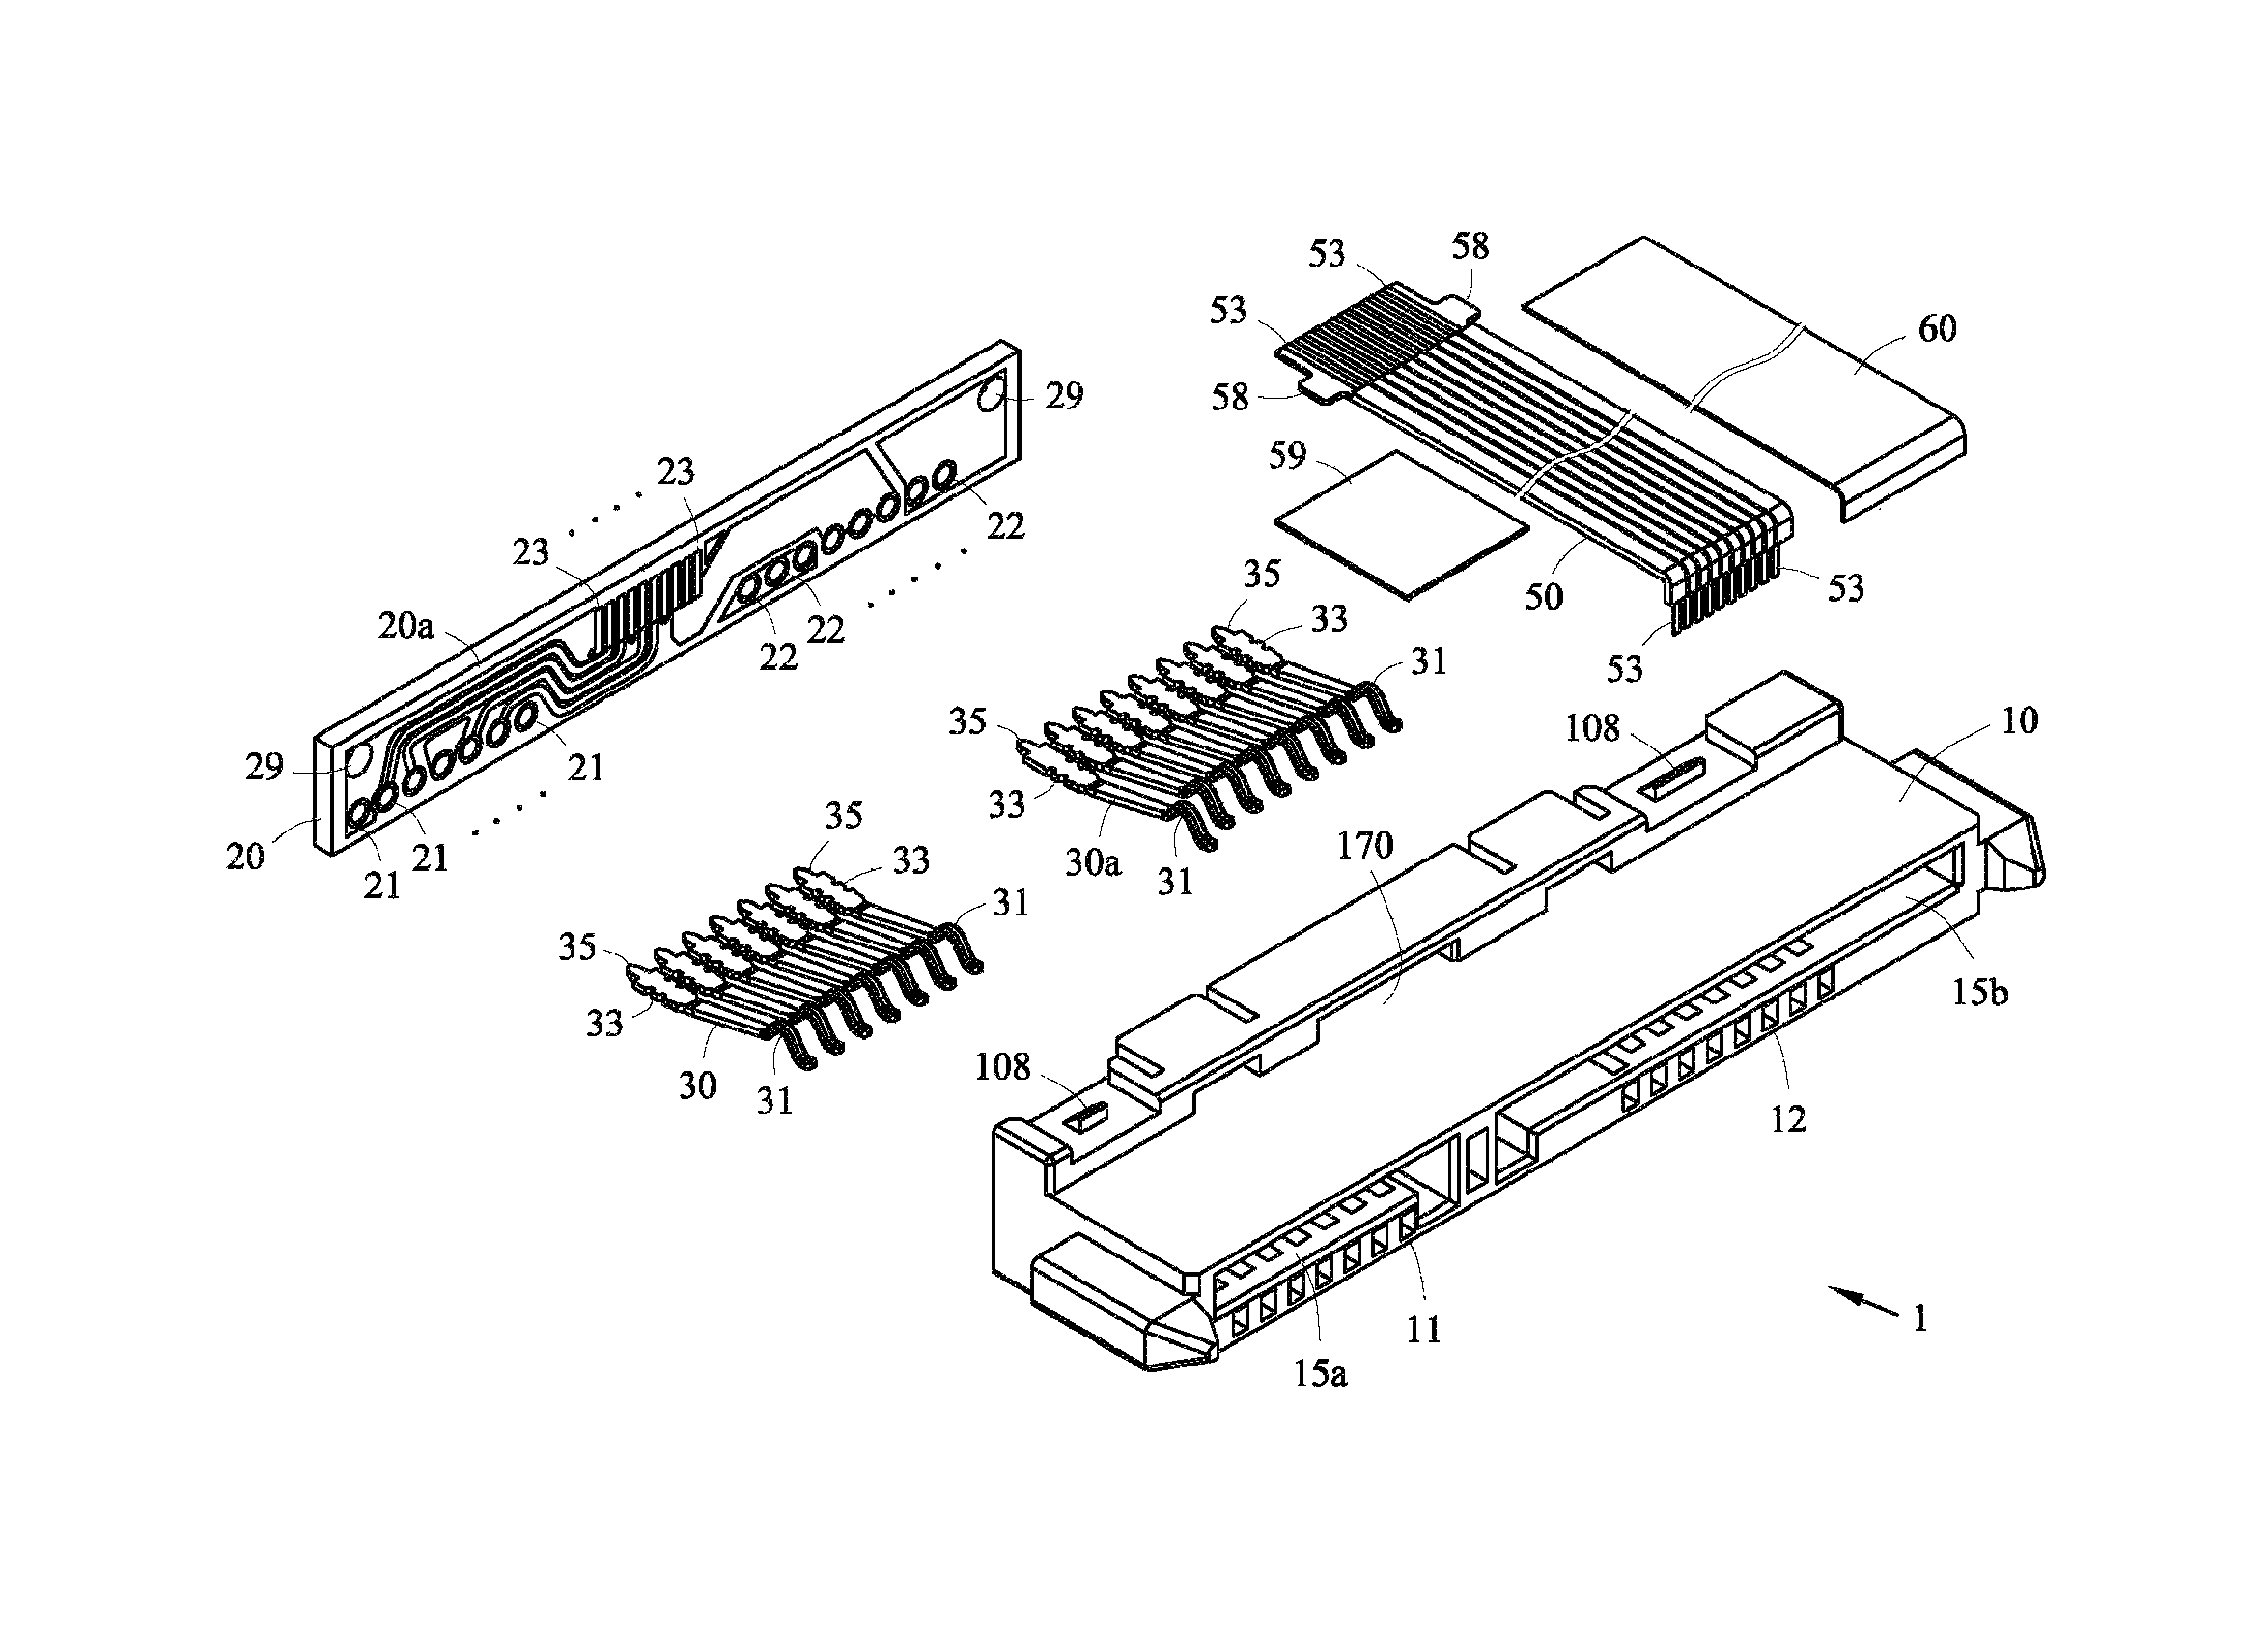 Flexible cable connector assembly